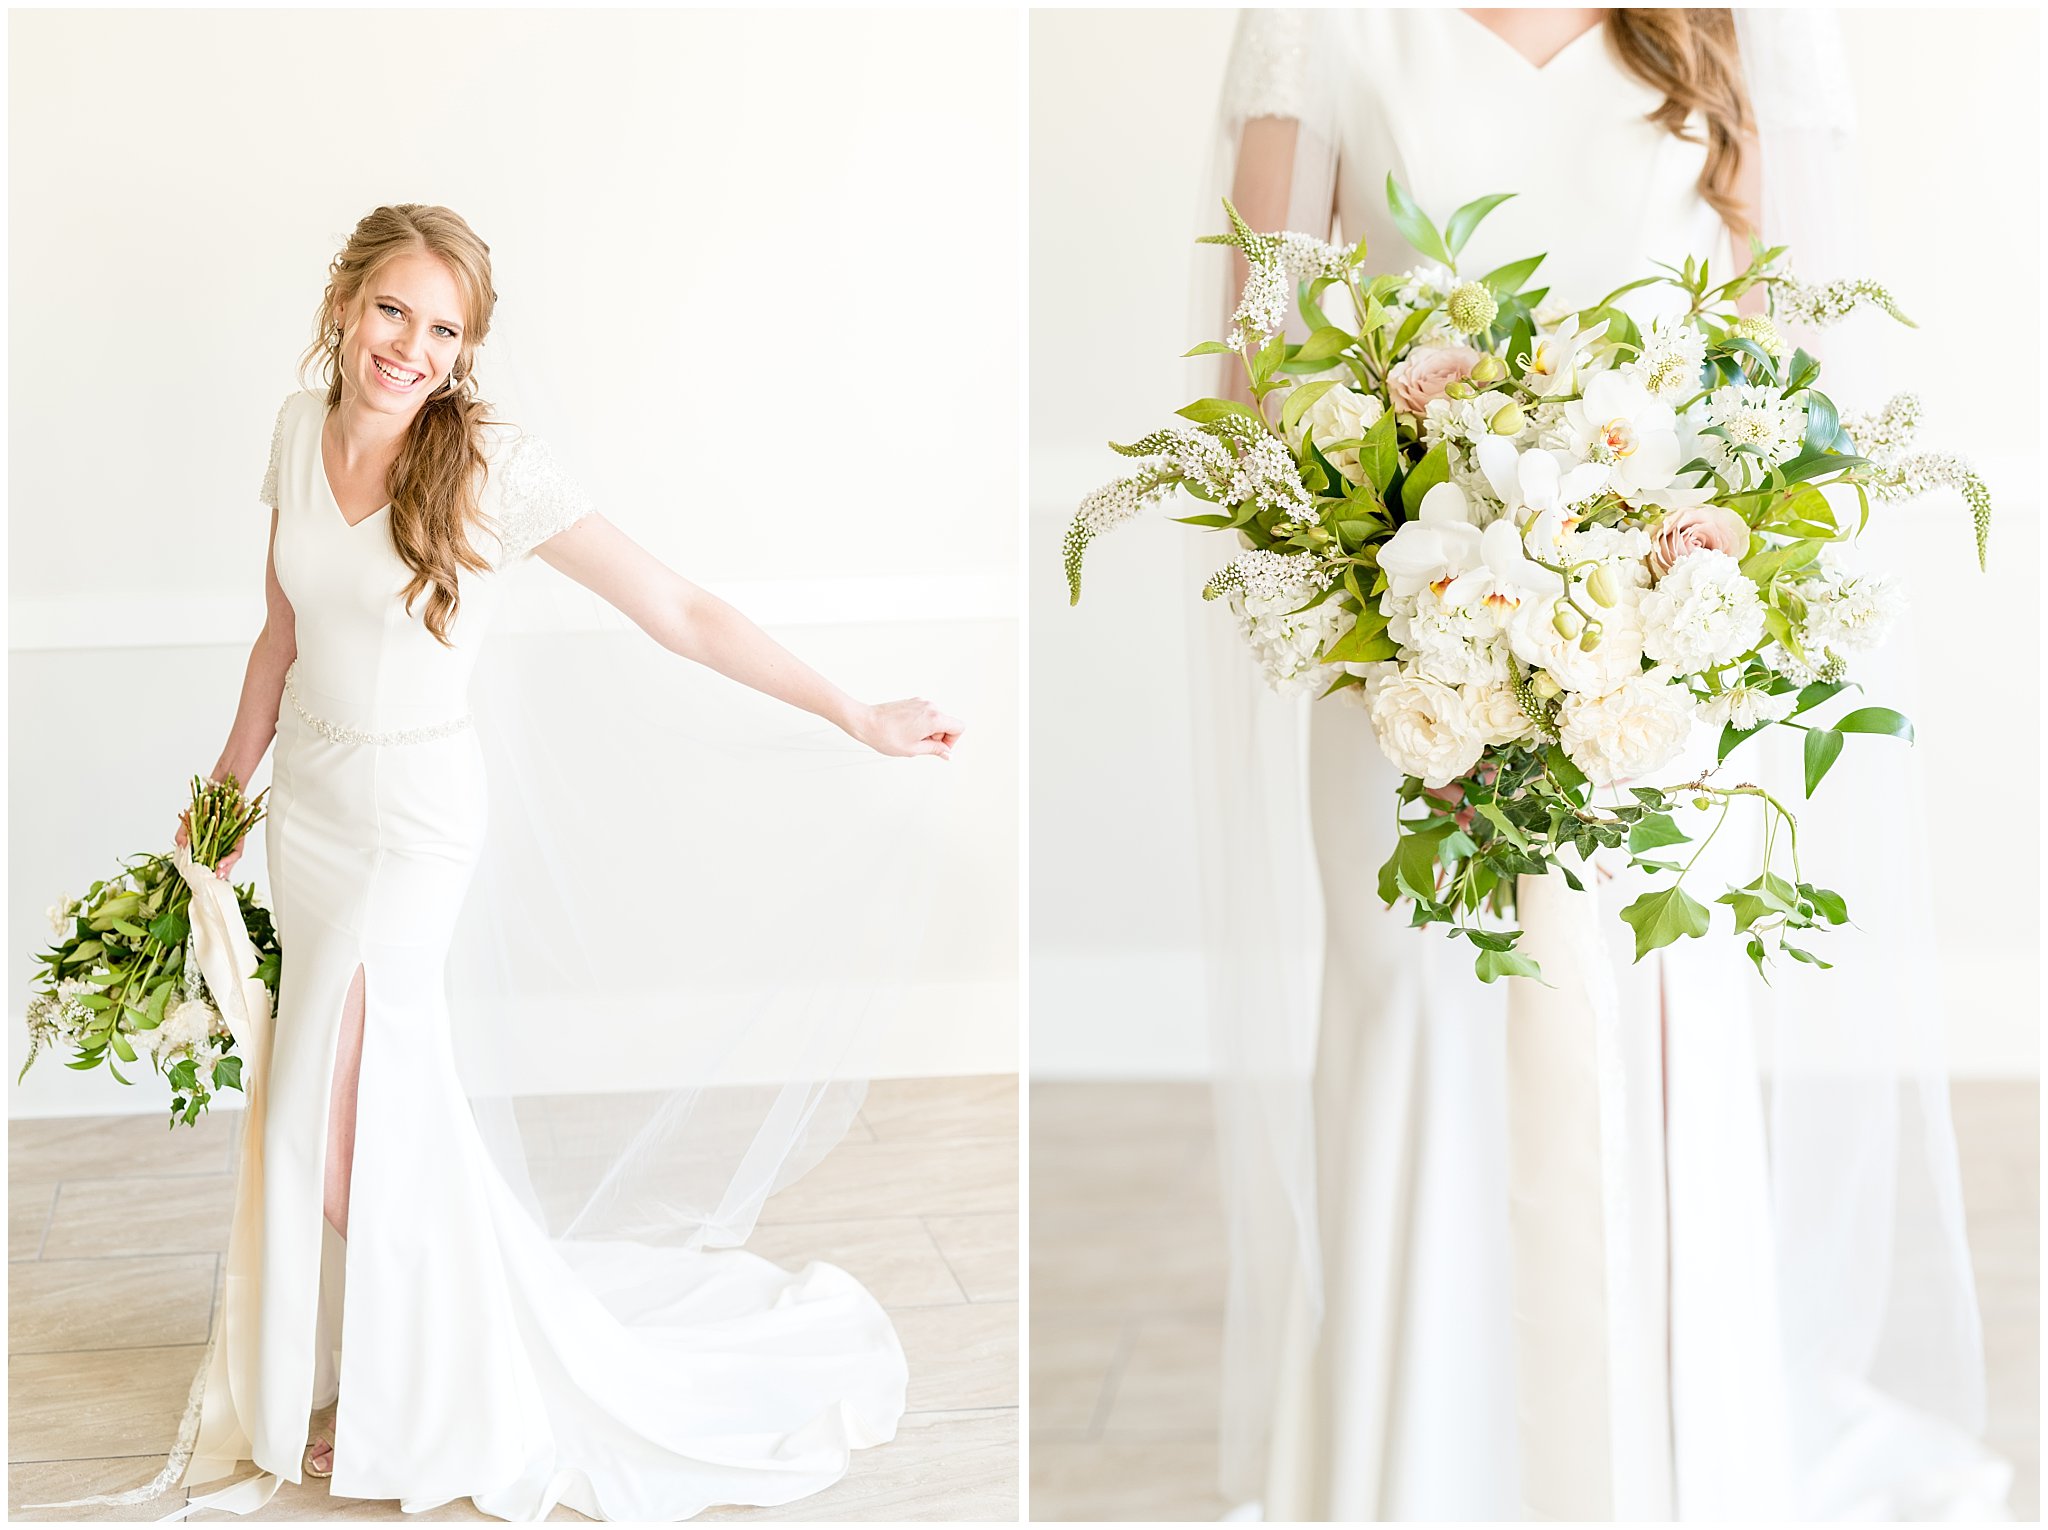 Bright and joyful laughing bridal shot with veil and bouquet | Talia Event Center